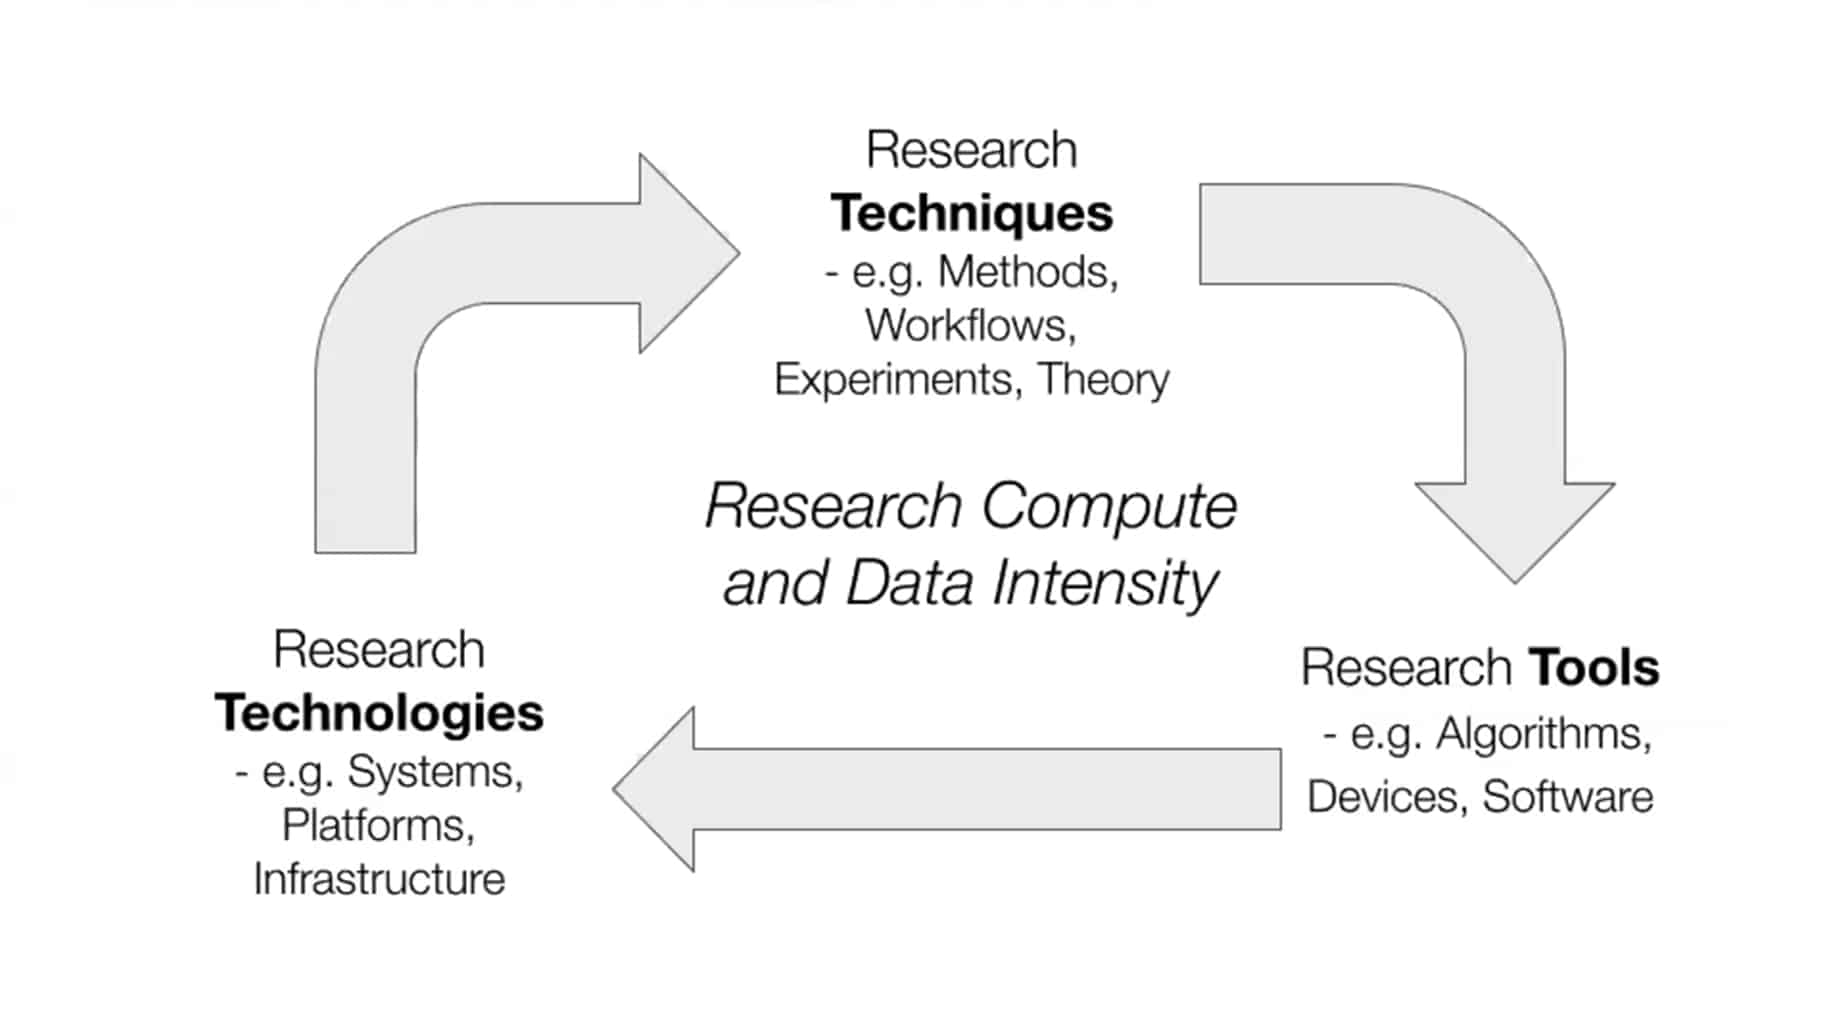 A diagram showing a cycle with 3 elements flowing clockwise around the words “Research Compute and Data Intensity”. Clockwise from the top, the 3 elements are: Research Techniques, e g Methods, Workflows, Experiments, Theory; Research Tools, e g Algorithms, Devices, Software; Research Technologies, e g Systems, Platforms, Infrastructure